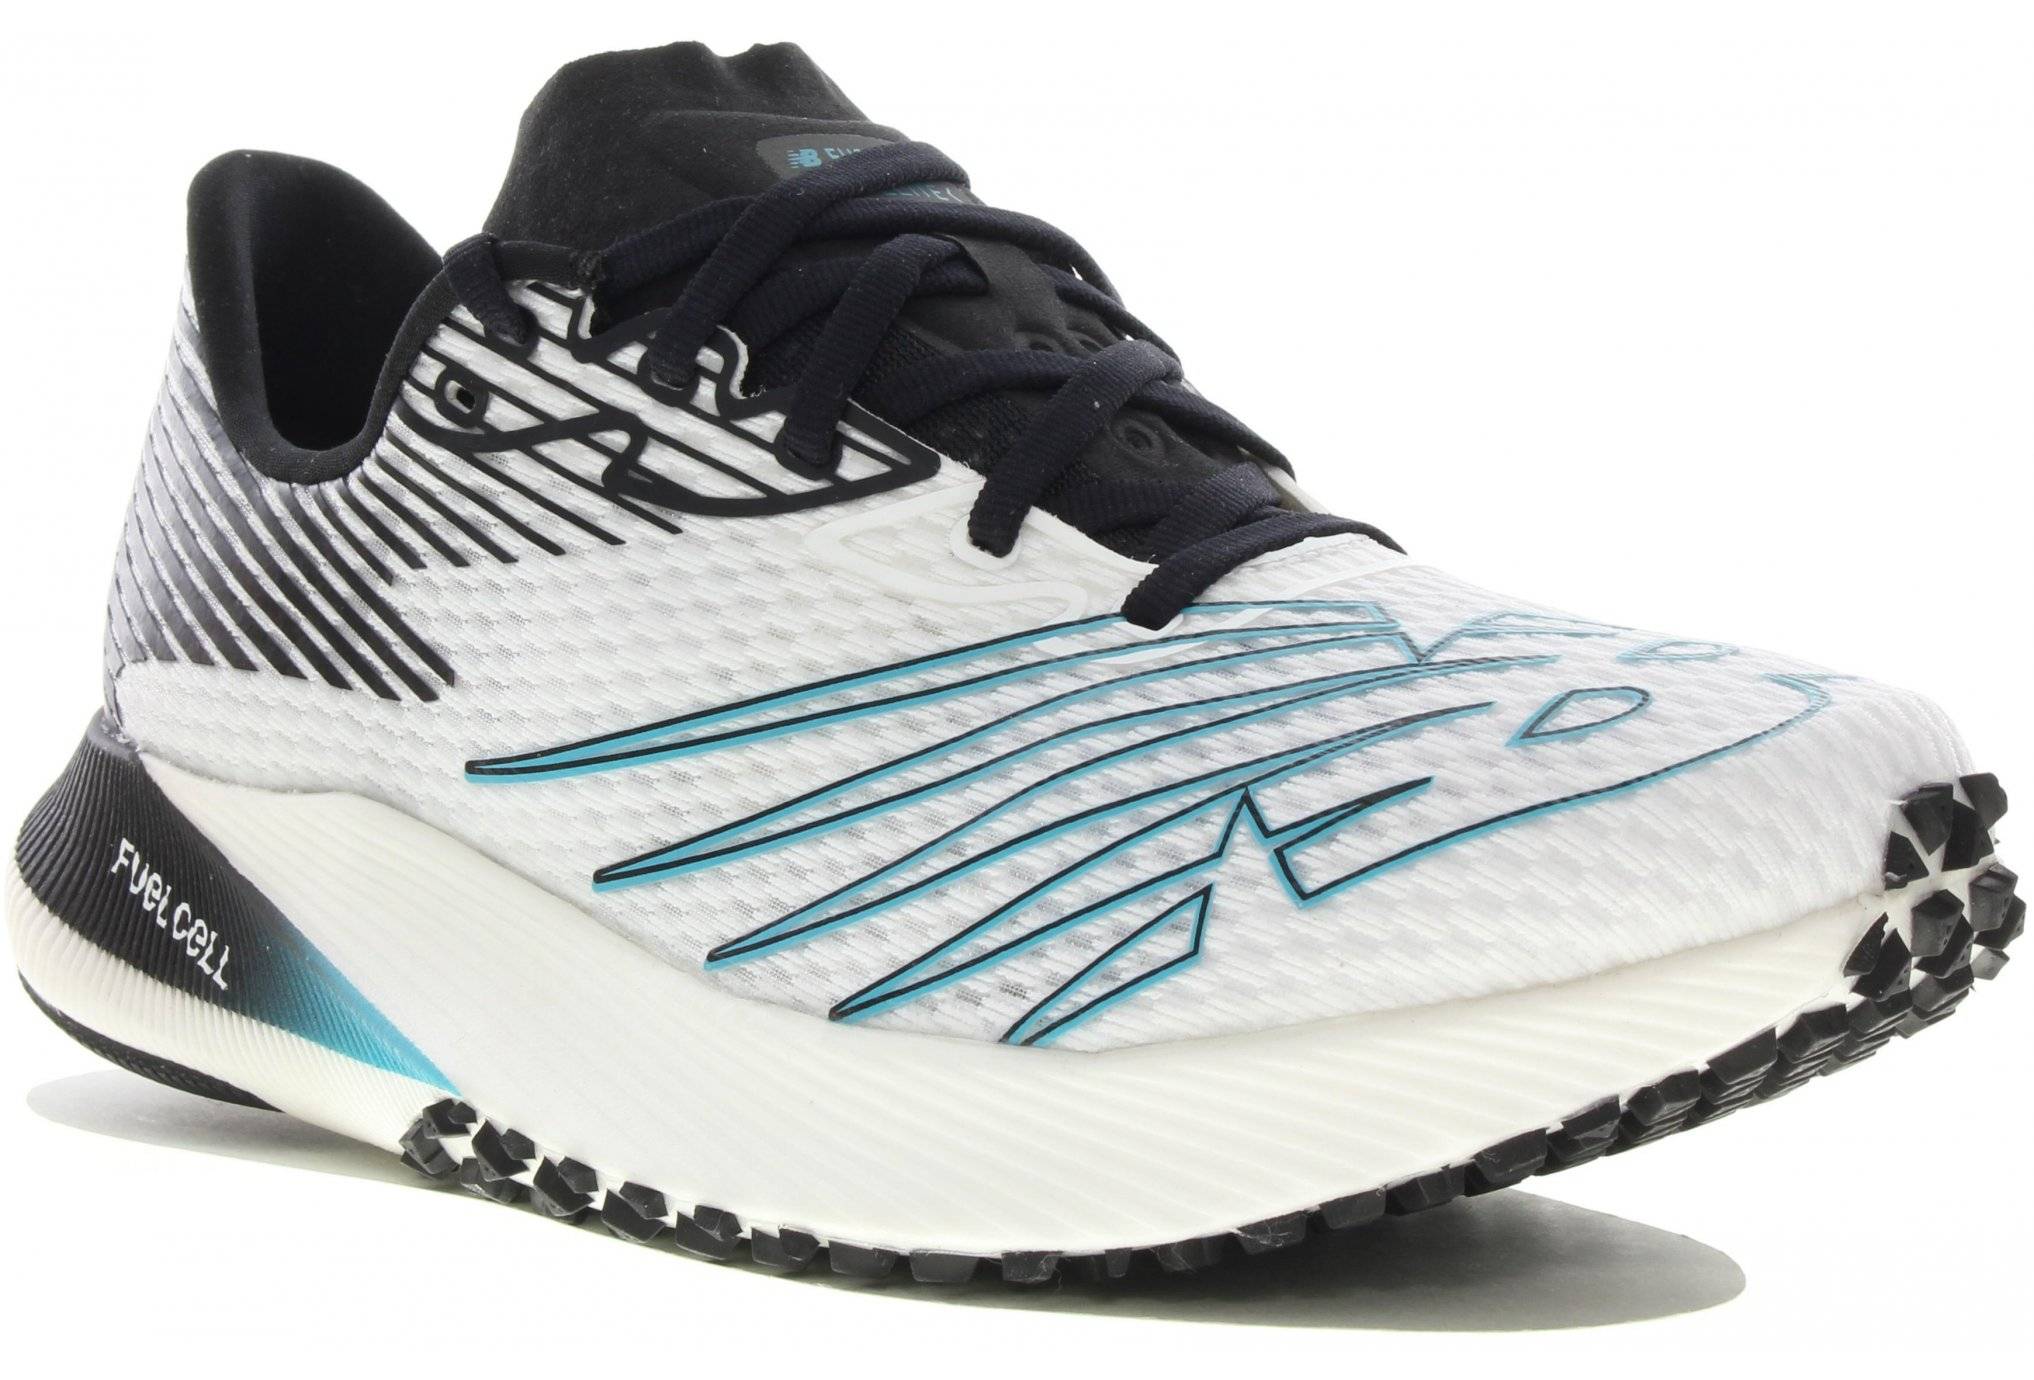 New Balance FuelCell RC Elite M 